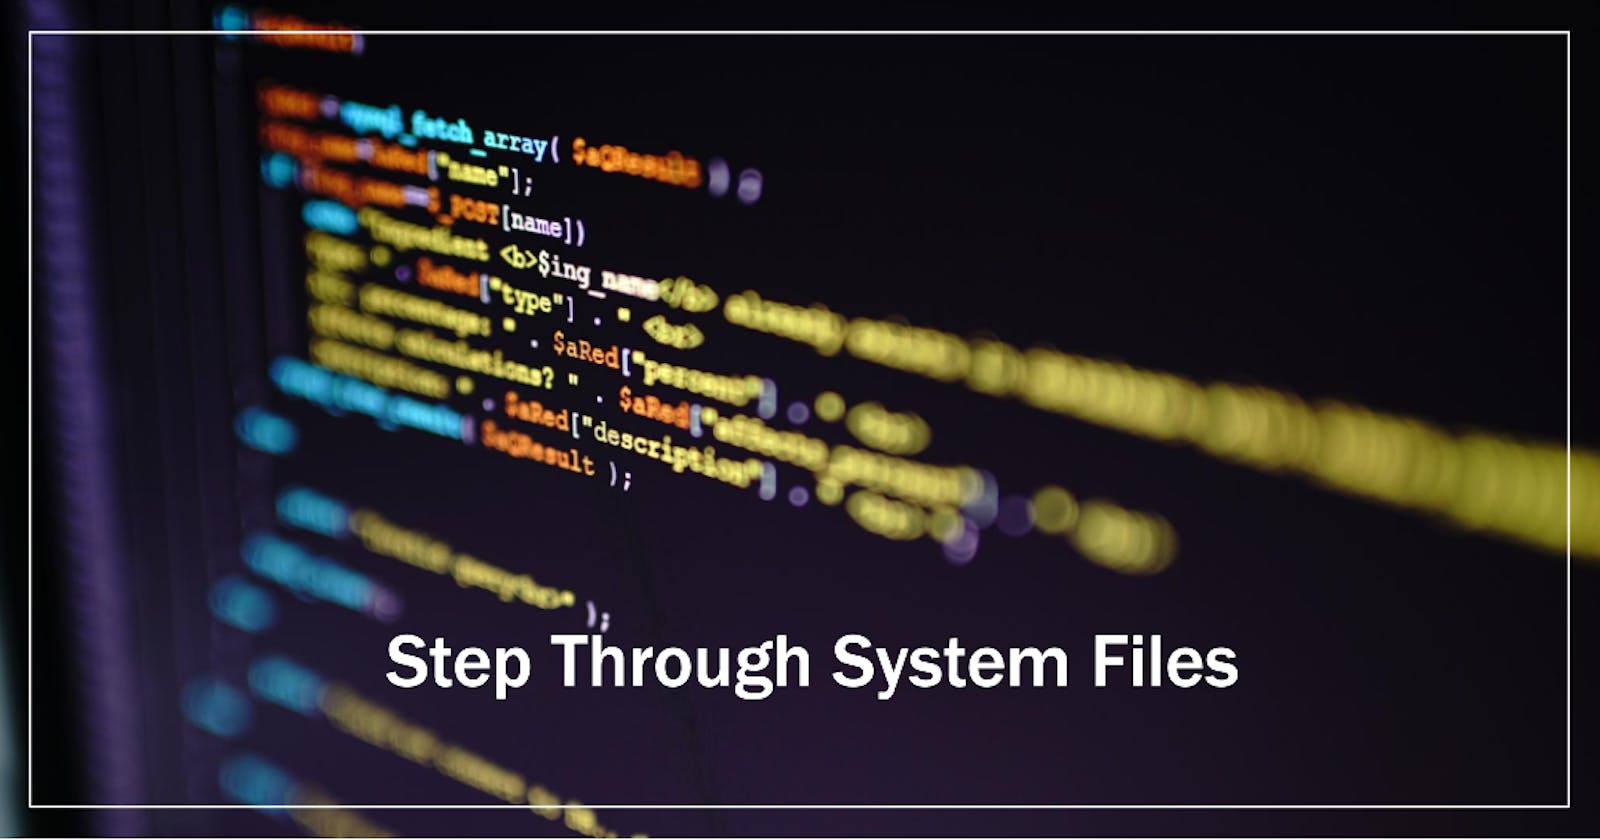 How To Step Through System Files With Python